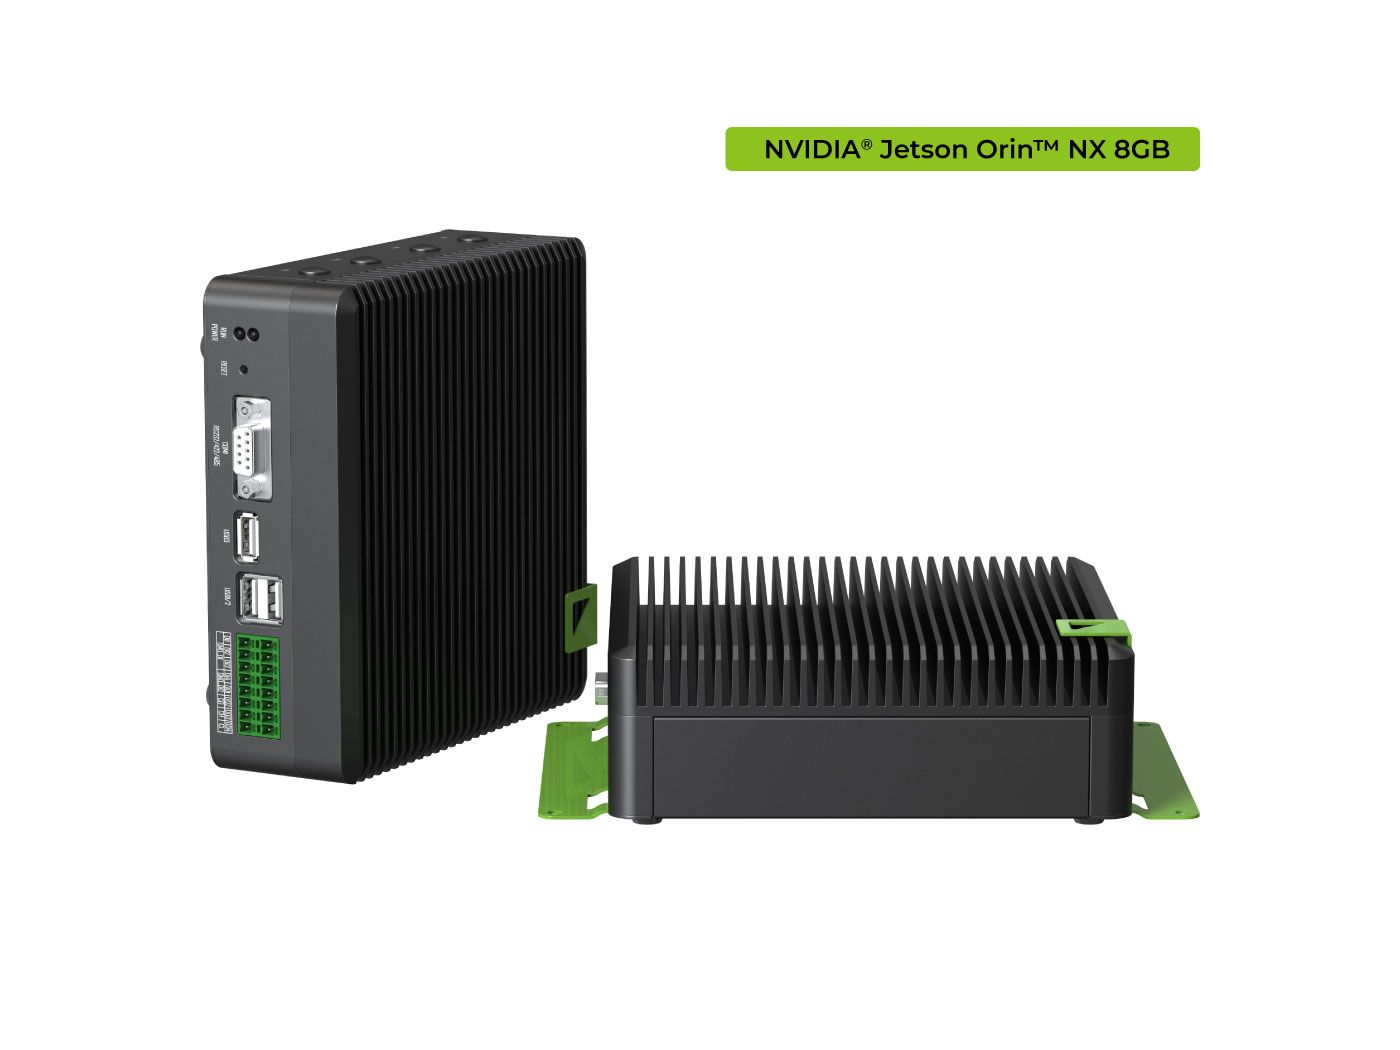 reComputer Industrial J4011 Fanless Edge AI Device NVIDIA Jetson Orin NX 8GB module Pre-installed JetPack System